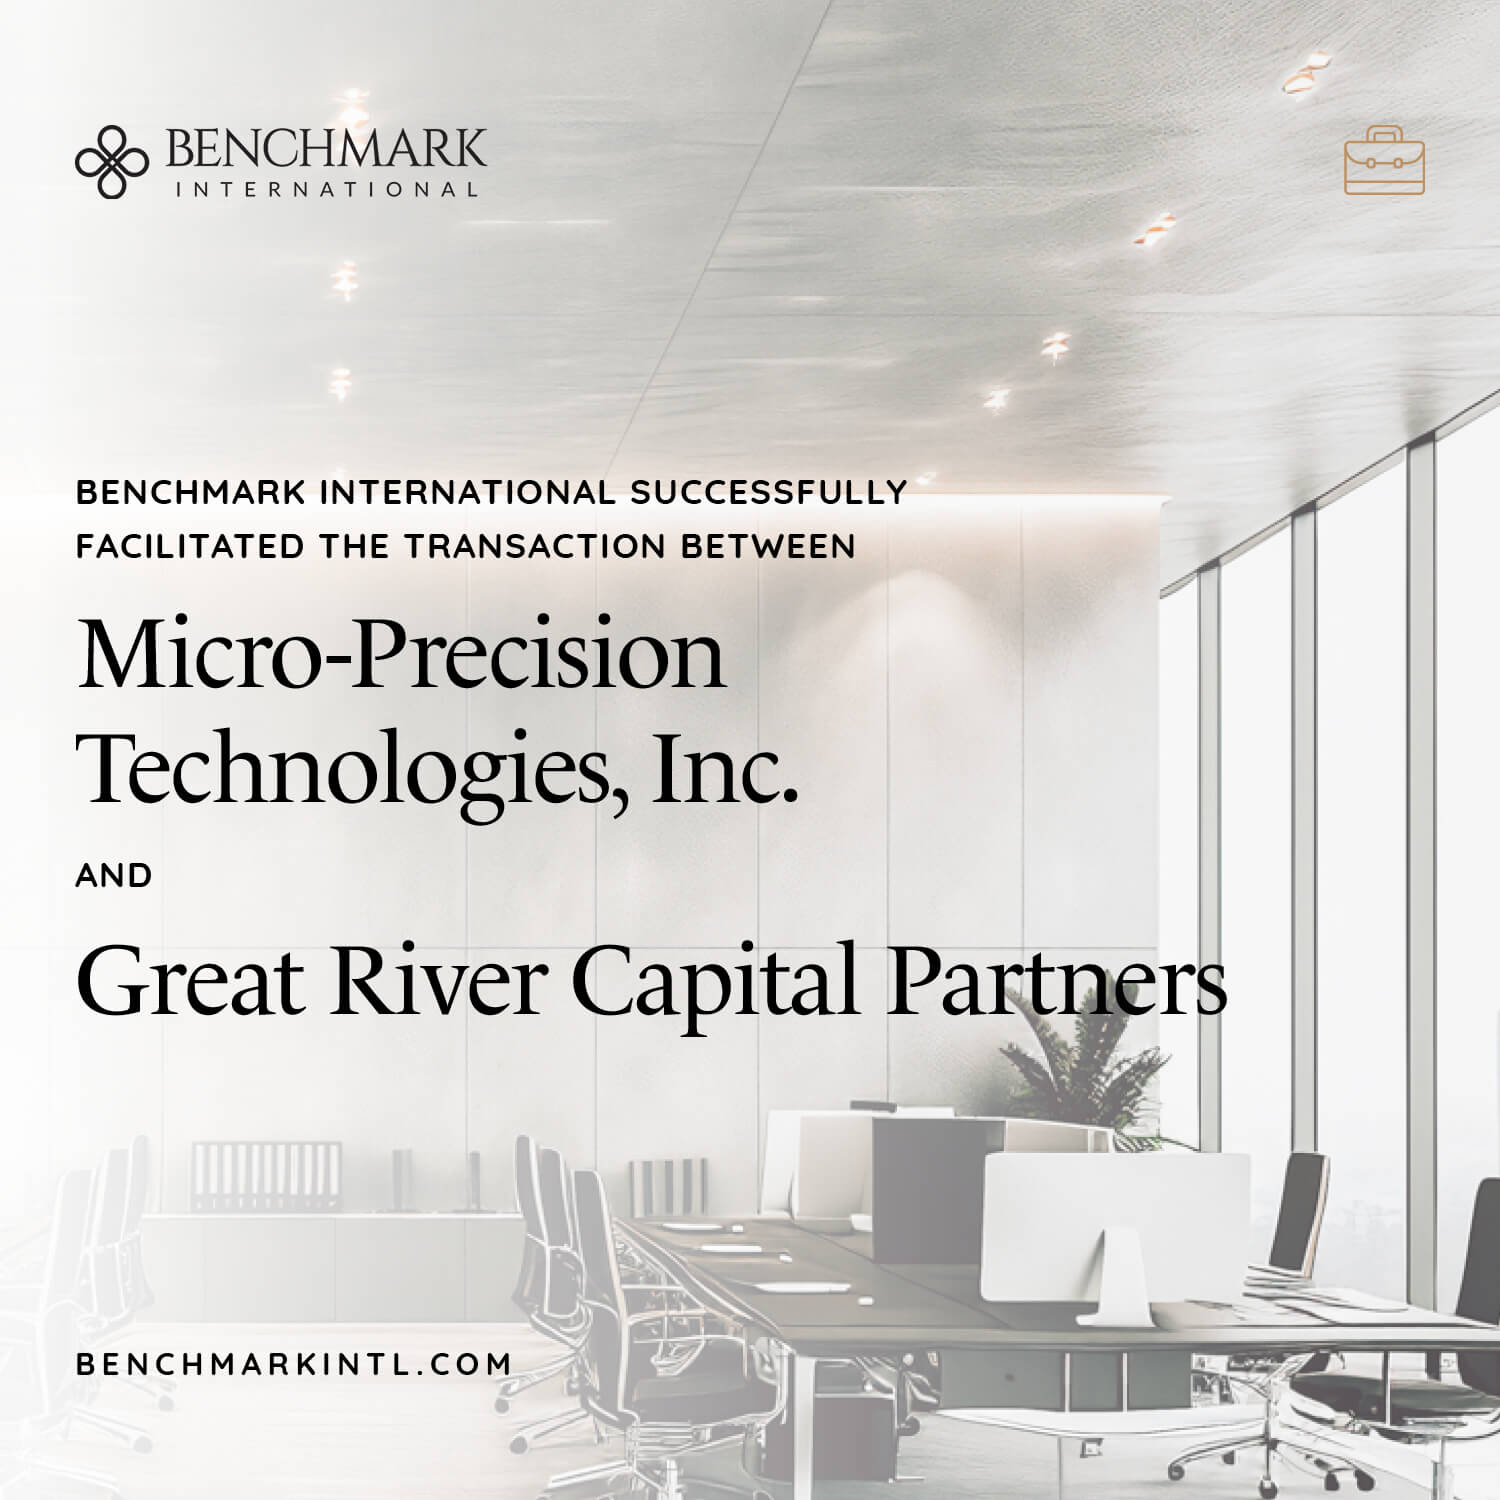 Benchmark International Successfully Facilitated the Transaction Between Micro-Precision Technologies, Inc. and Great River Capital Partners